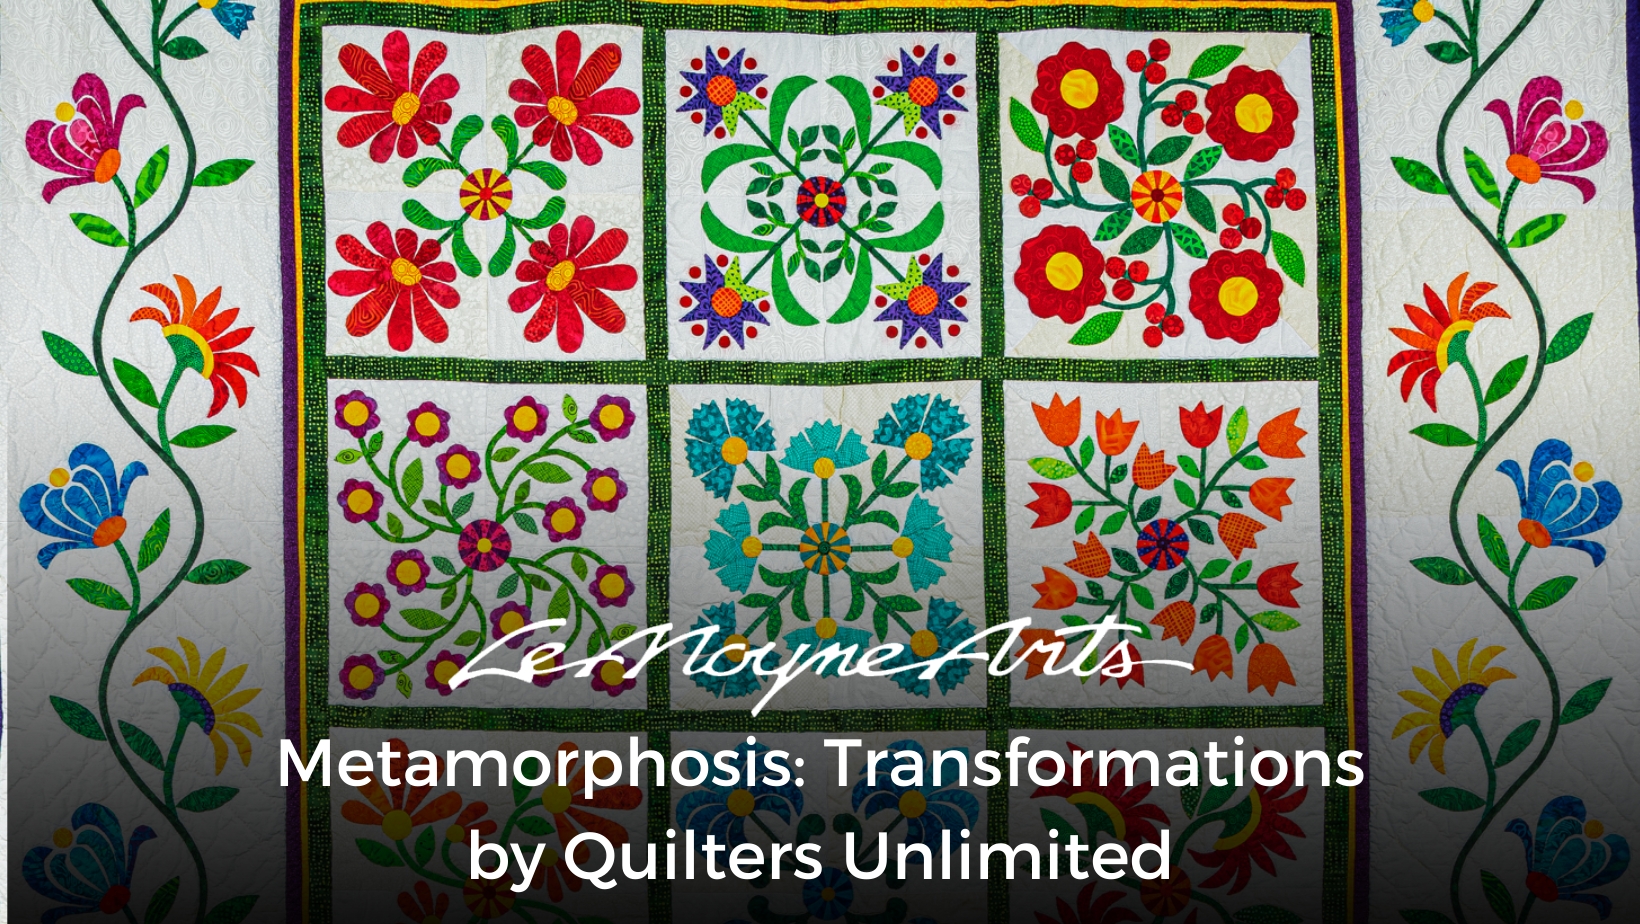 Metamorphosis: Transformations, by Quilters Unlimited cover image